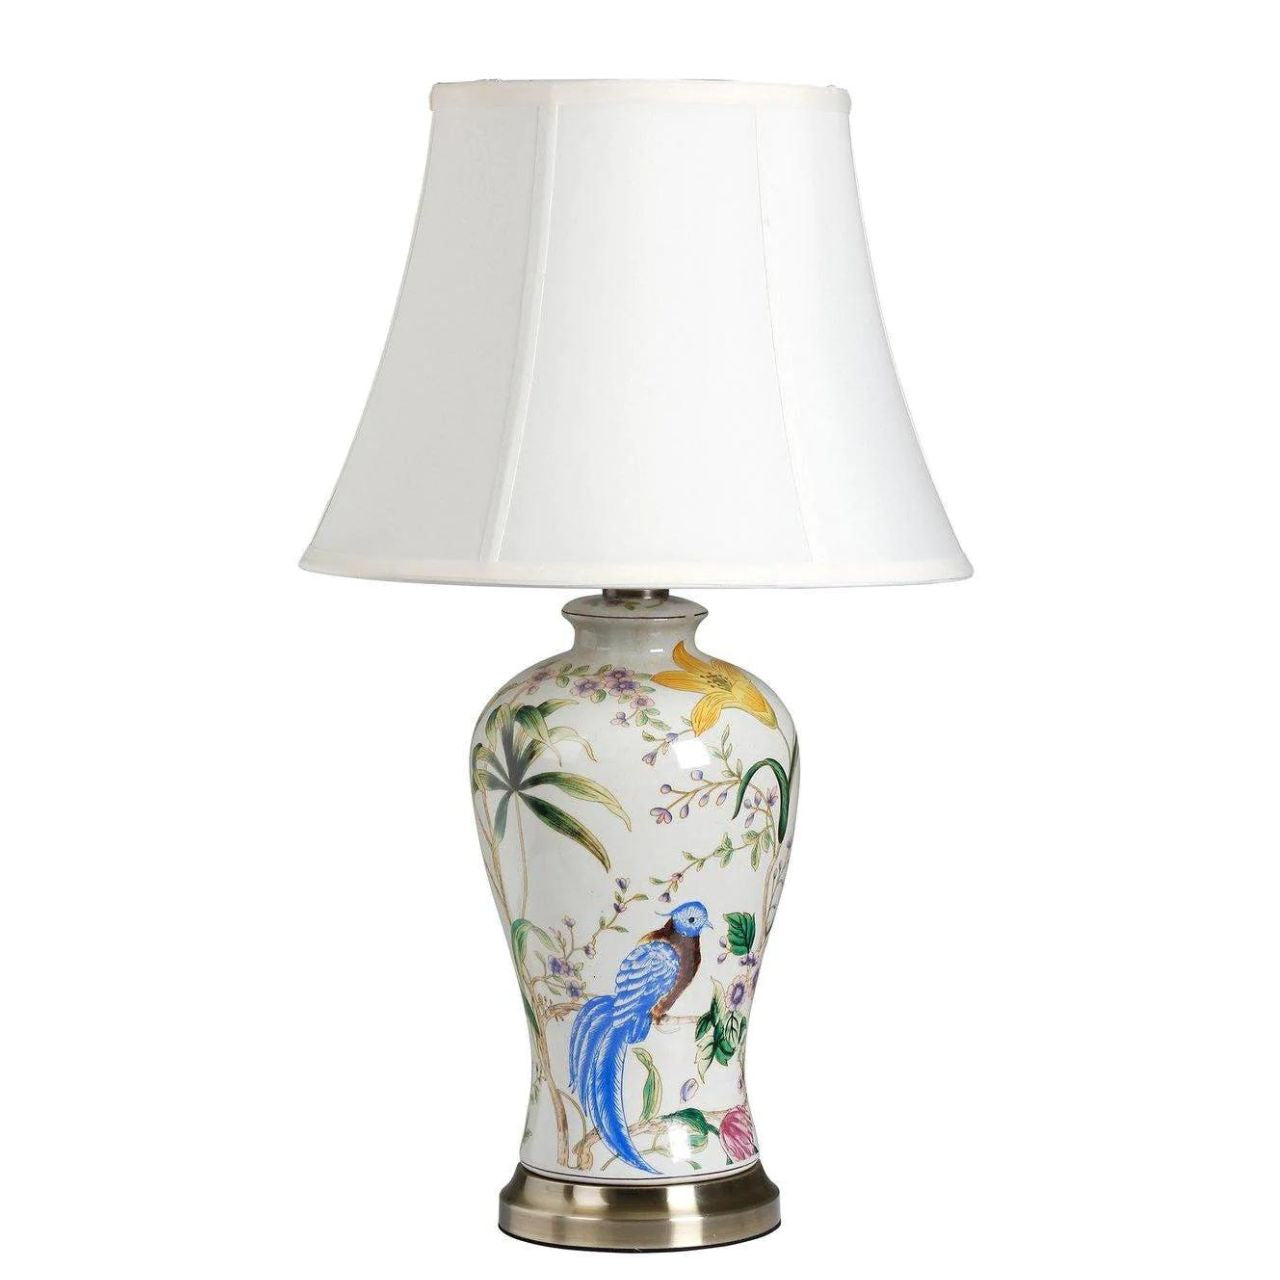 Mindy Brownes Interiors Ava Lamp  Birds of Paradise Lamp, bring a pop of colour to your room. Ceramic lamp with brass bass and white linen shade.